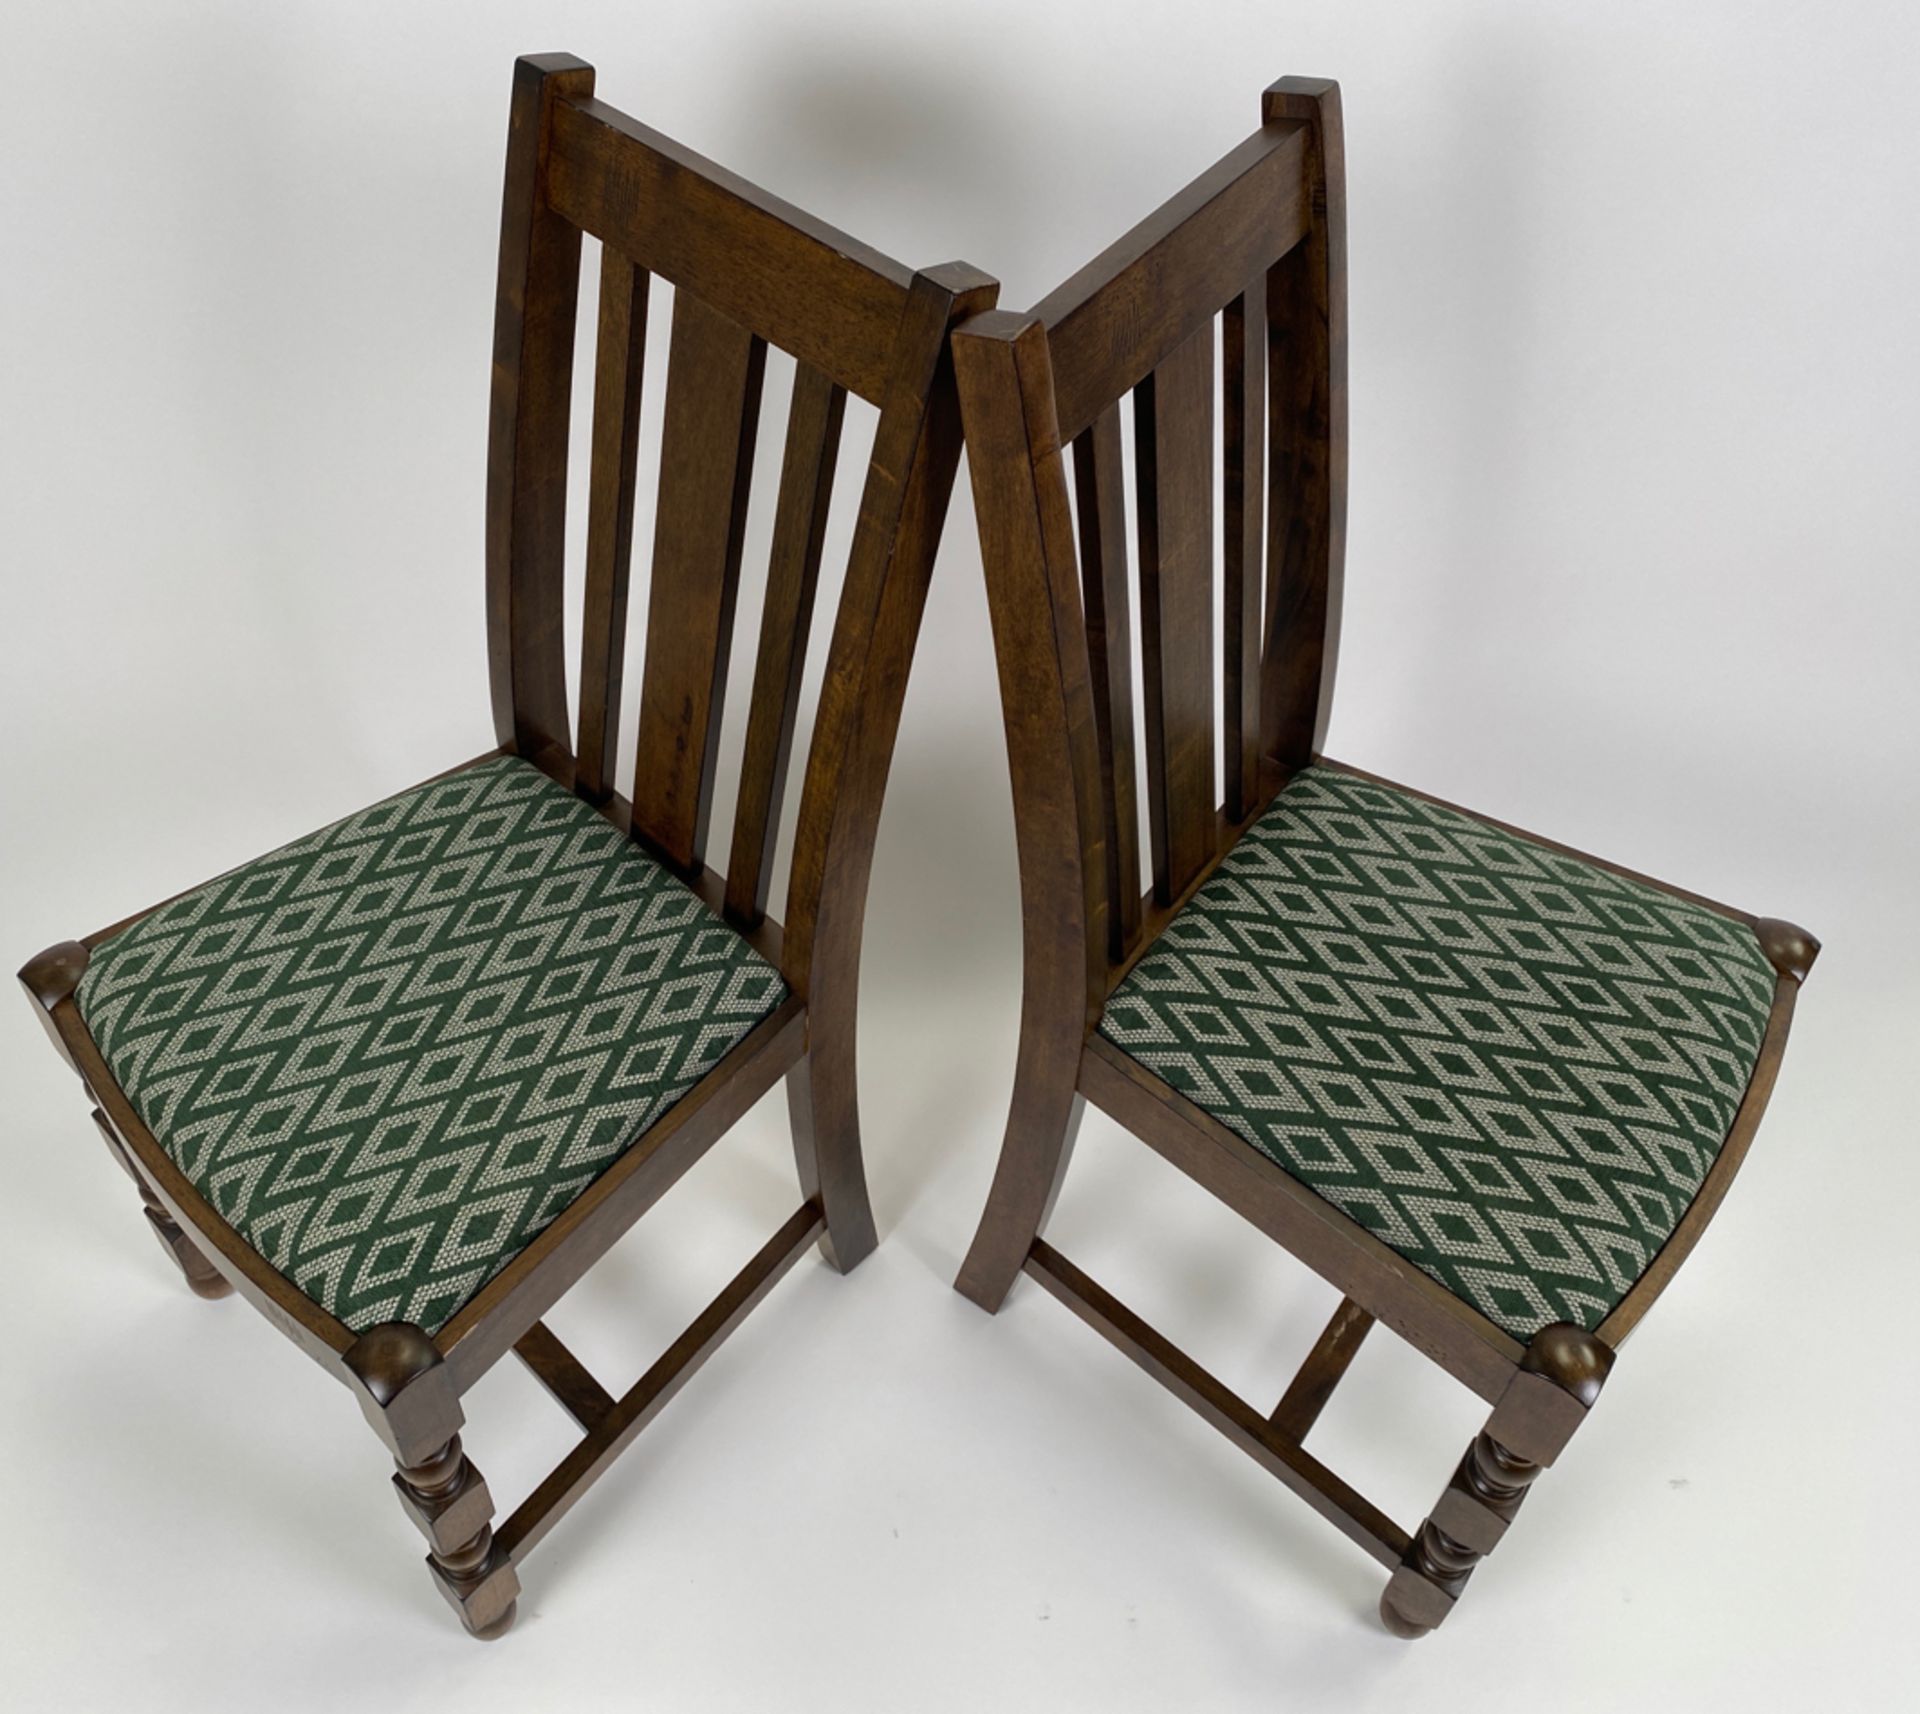 Mayfair Dining Chairs with Green Diamond Padded Seat - Image 3 of 5